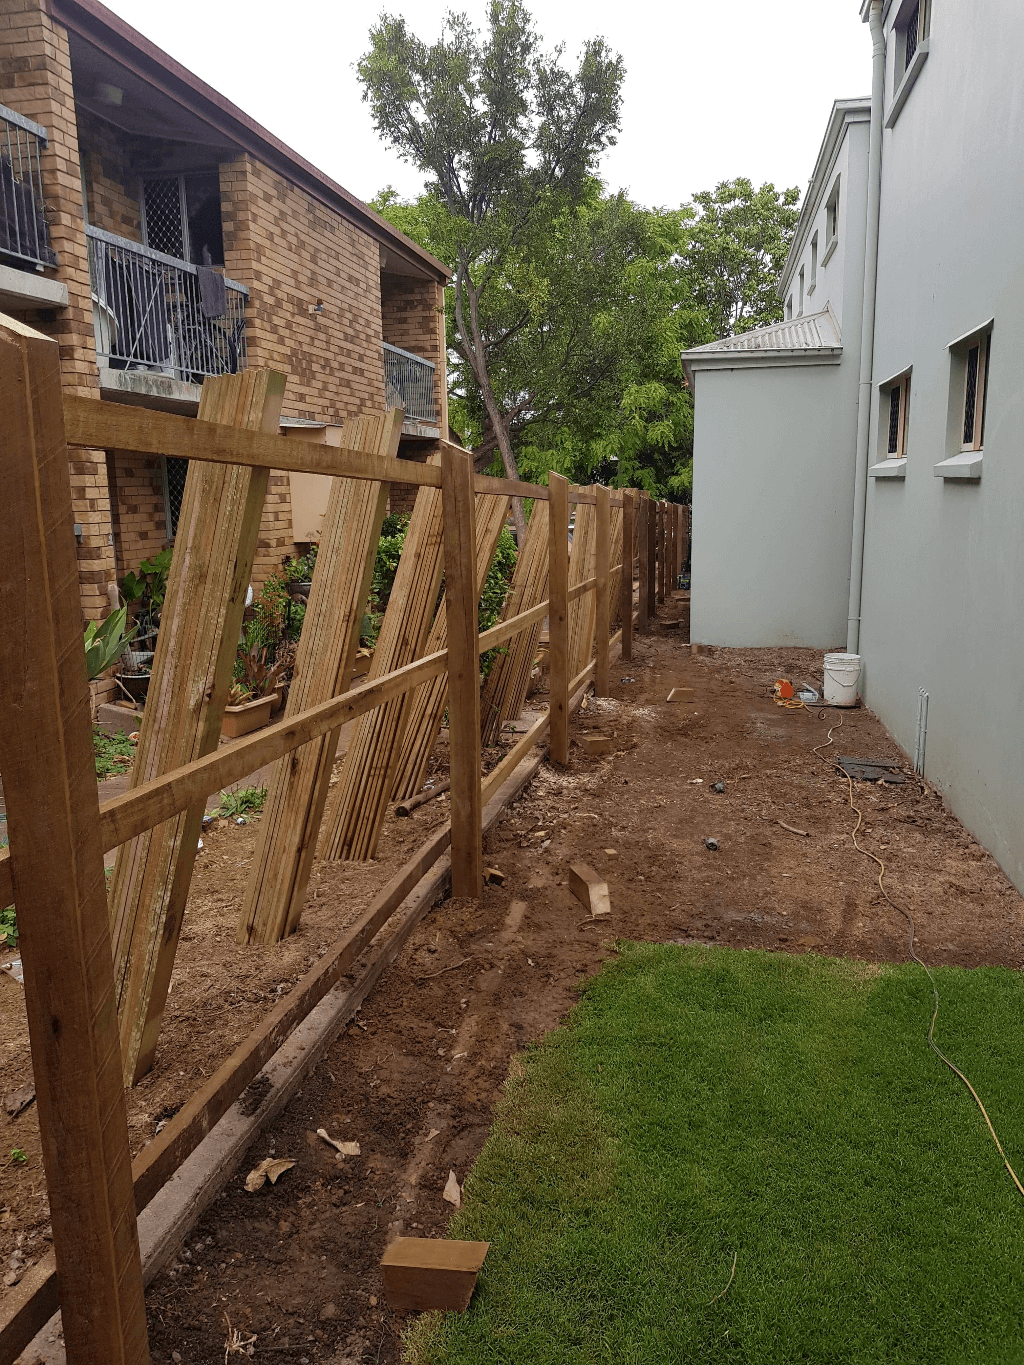 completed strata building maintenance in Brisbane view of wooden fence frame and planks grounds maintenance between strata complexes in Brisbane